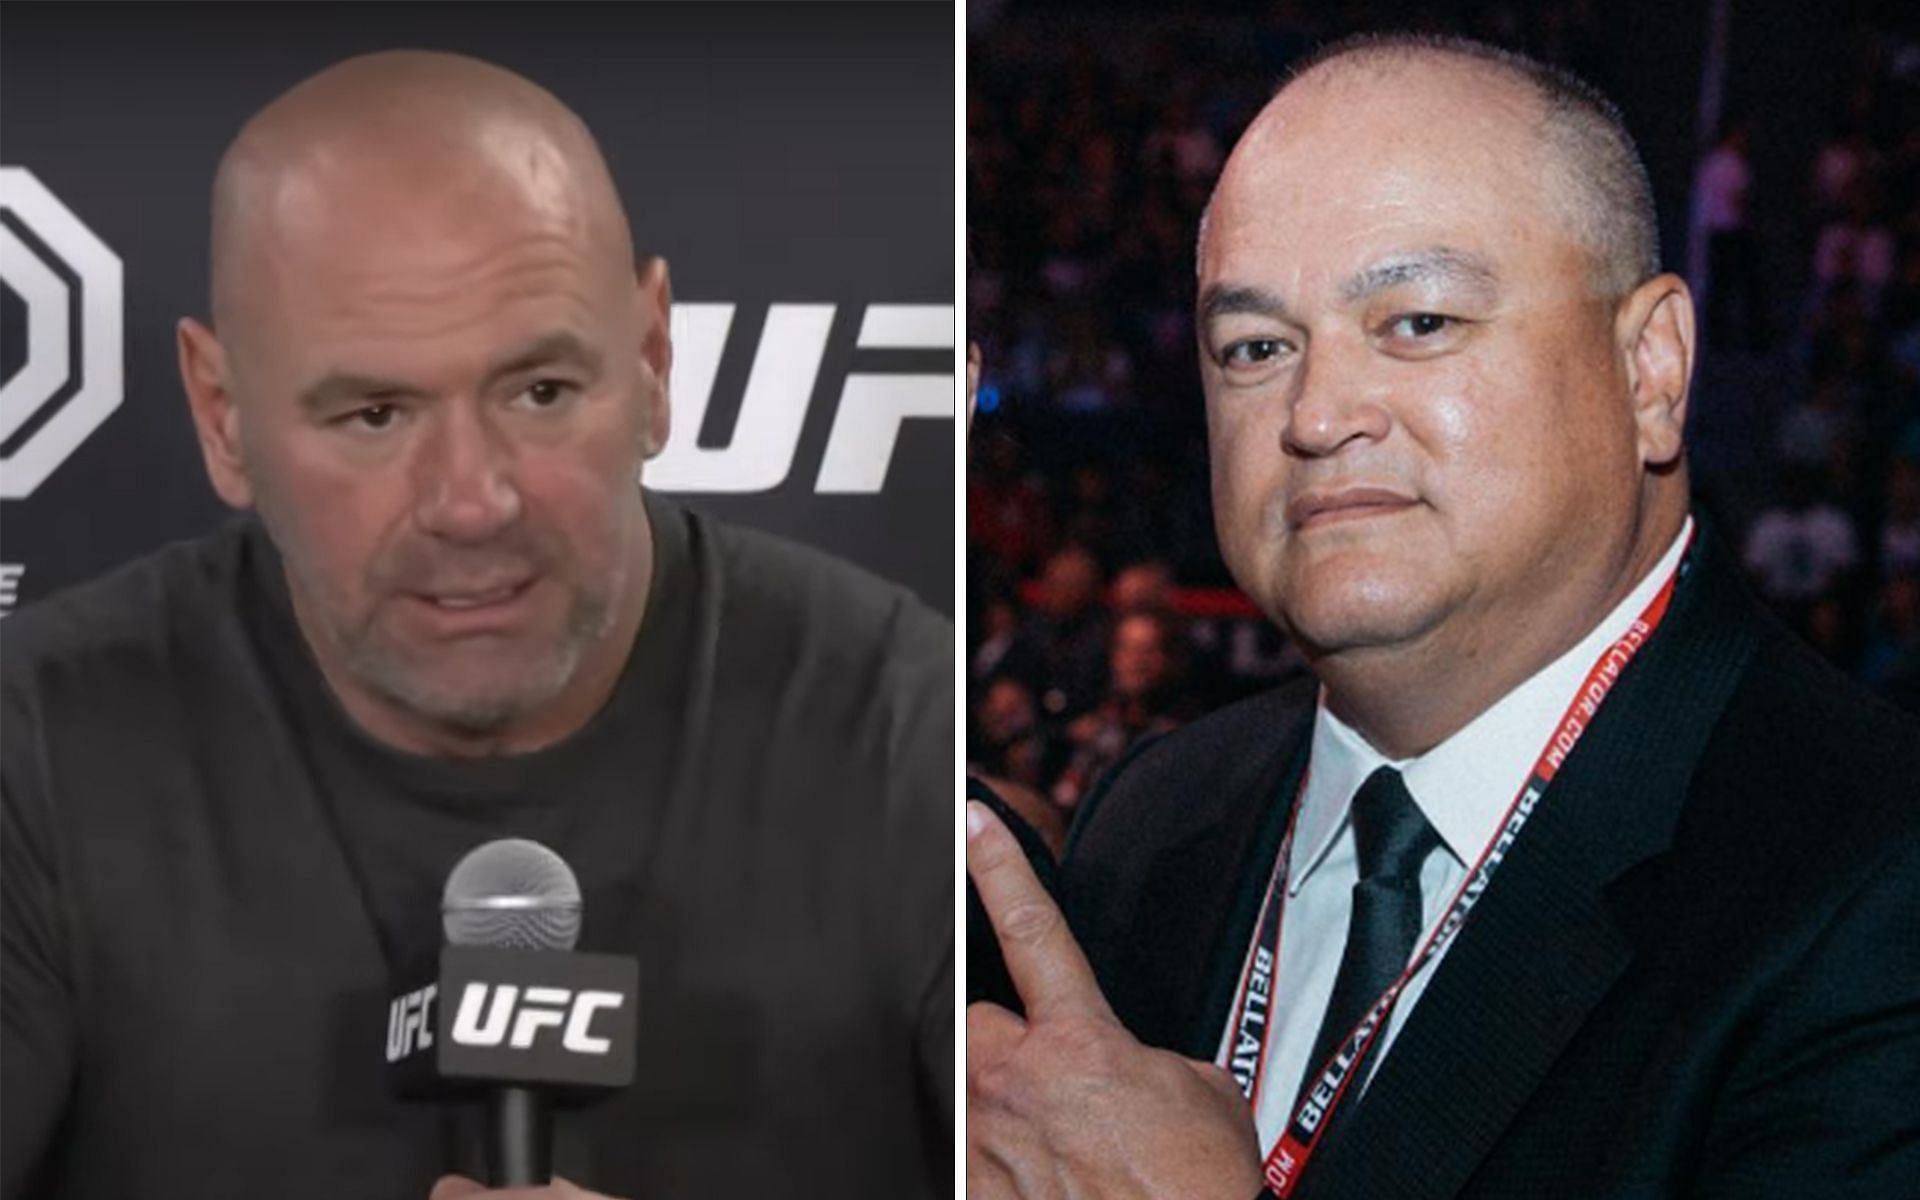 Dana White (Left) and Scott Coker (Right) (Images via UFC YouTube channel and @therealscottcoker Instagram)